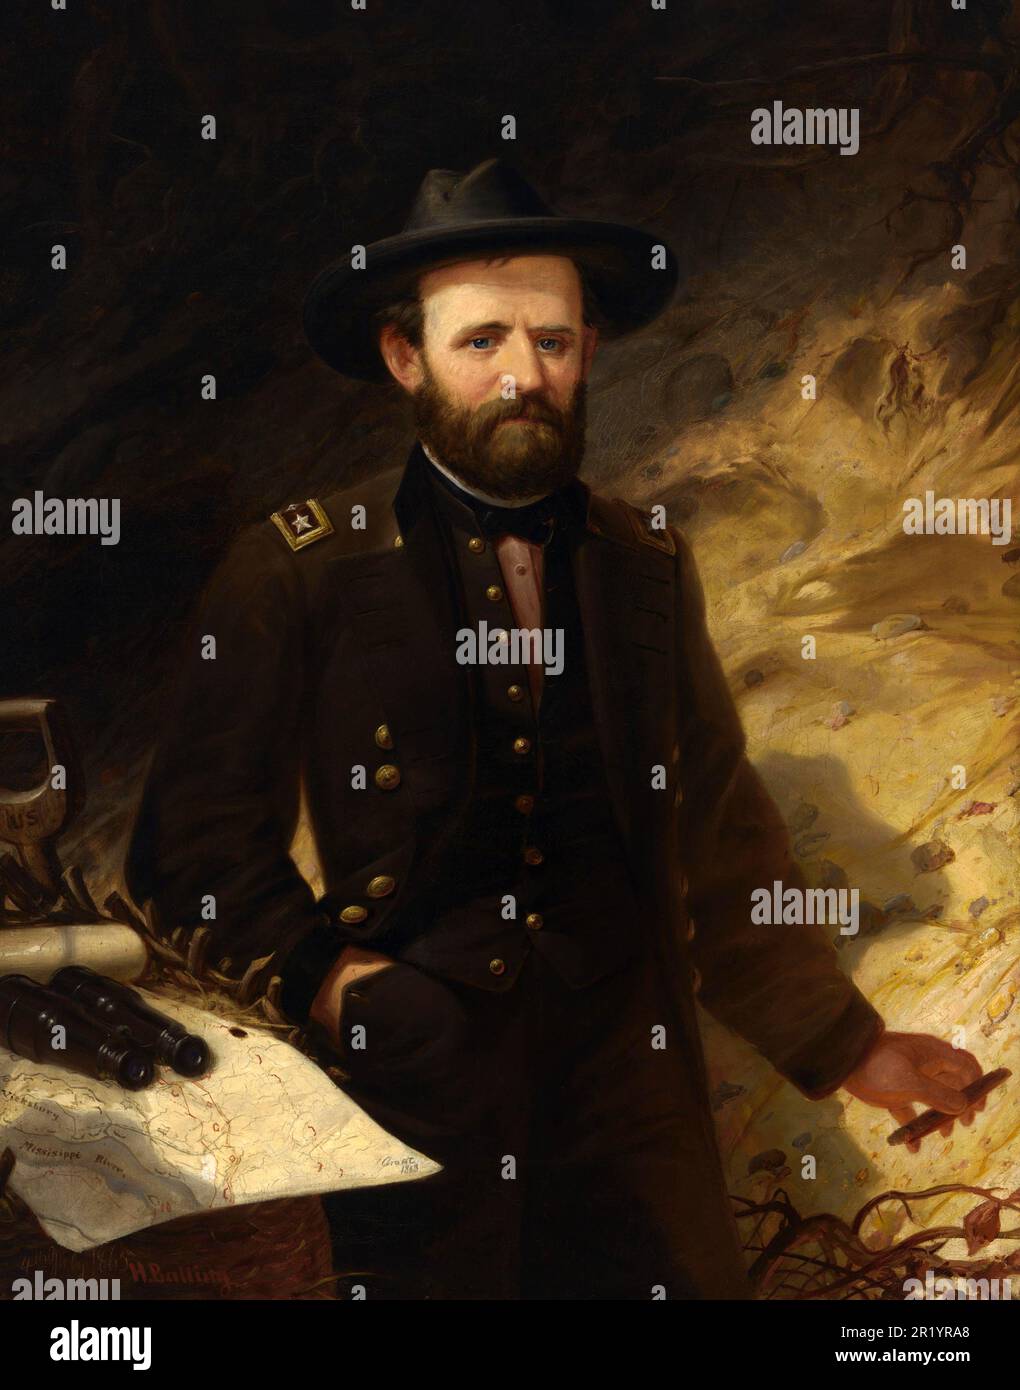 Ulysses S. Grant (27 April 1822-23 July 1885) was a US general and politician. He was commander-in-chief of the US Army in the War of Secession and the 18th President of the United States of America from 1869 to 1877,, Painting by Ole Peter Hansen Balling, Historical, digitally restored reproduction of a historical original  /  Ulysses S. Grant (27. April 1822-23. Juli 1885) war ein US-amerikanischer General und Politiker. Er war Oberbefehlshaber des US-Heeres im Sezessionskrieg und von 1869 bis 1877 der 18. Präsident der Vereinigten Staaten von Amerika,, Gemälde von Ole Peter Hansen Balling, Stock Photo